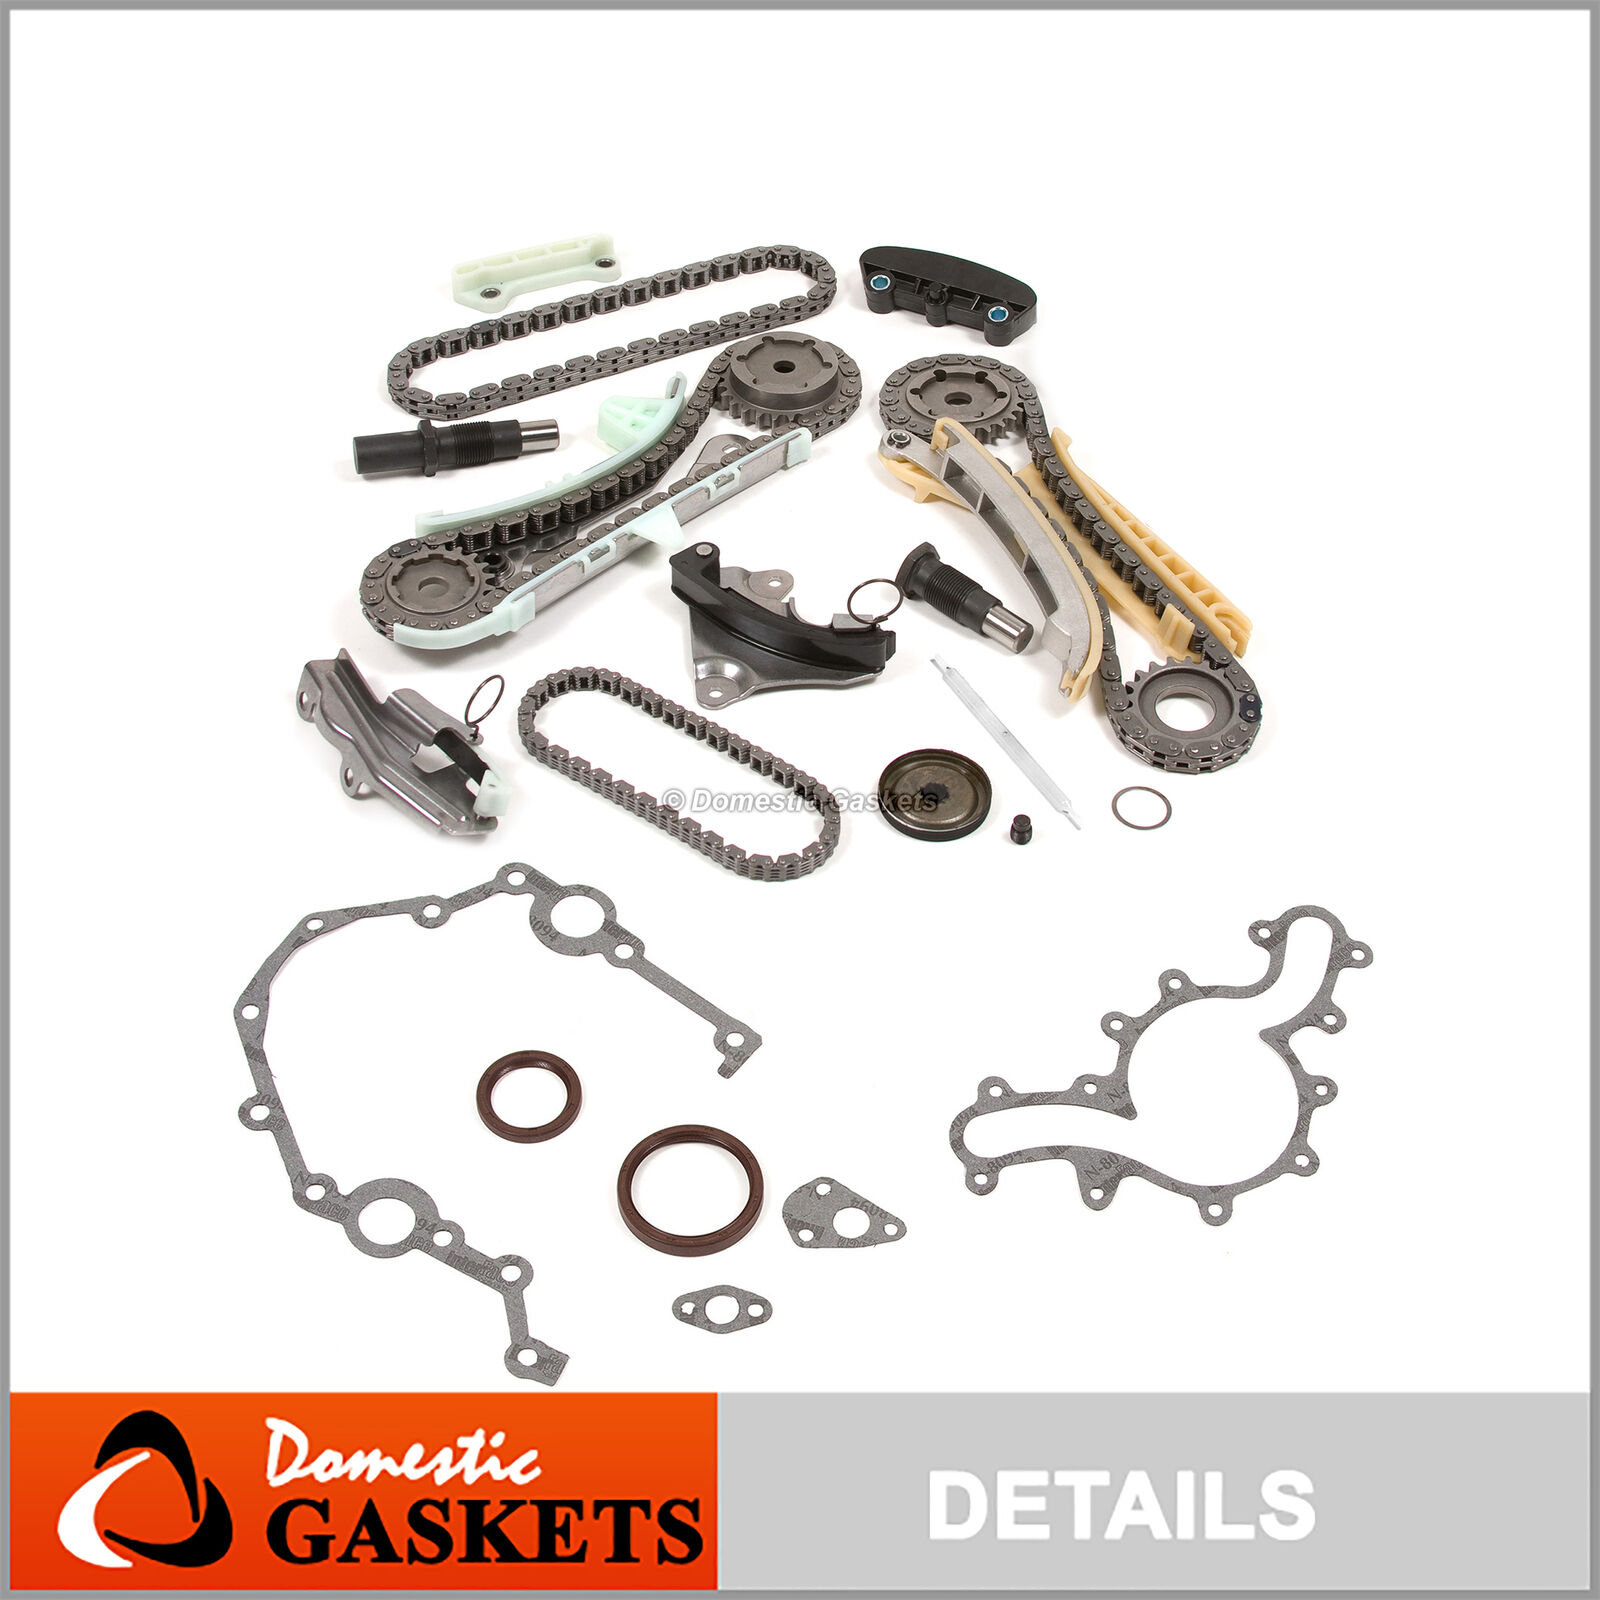 97-09 Ford Mercury Land Rover Mazda 4.0L OHV SOHC Timing Chain Kit+Cover Gasket